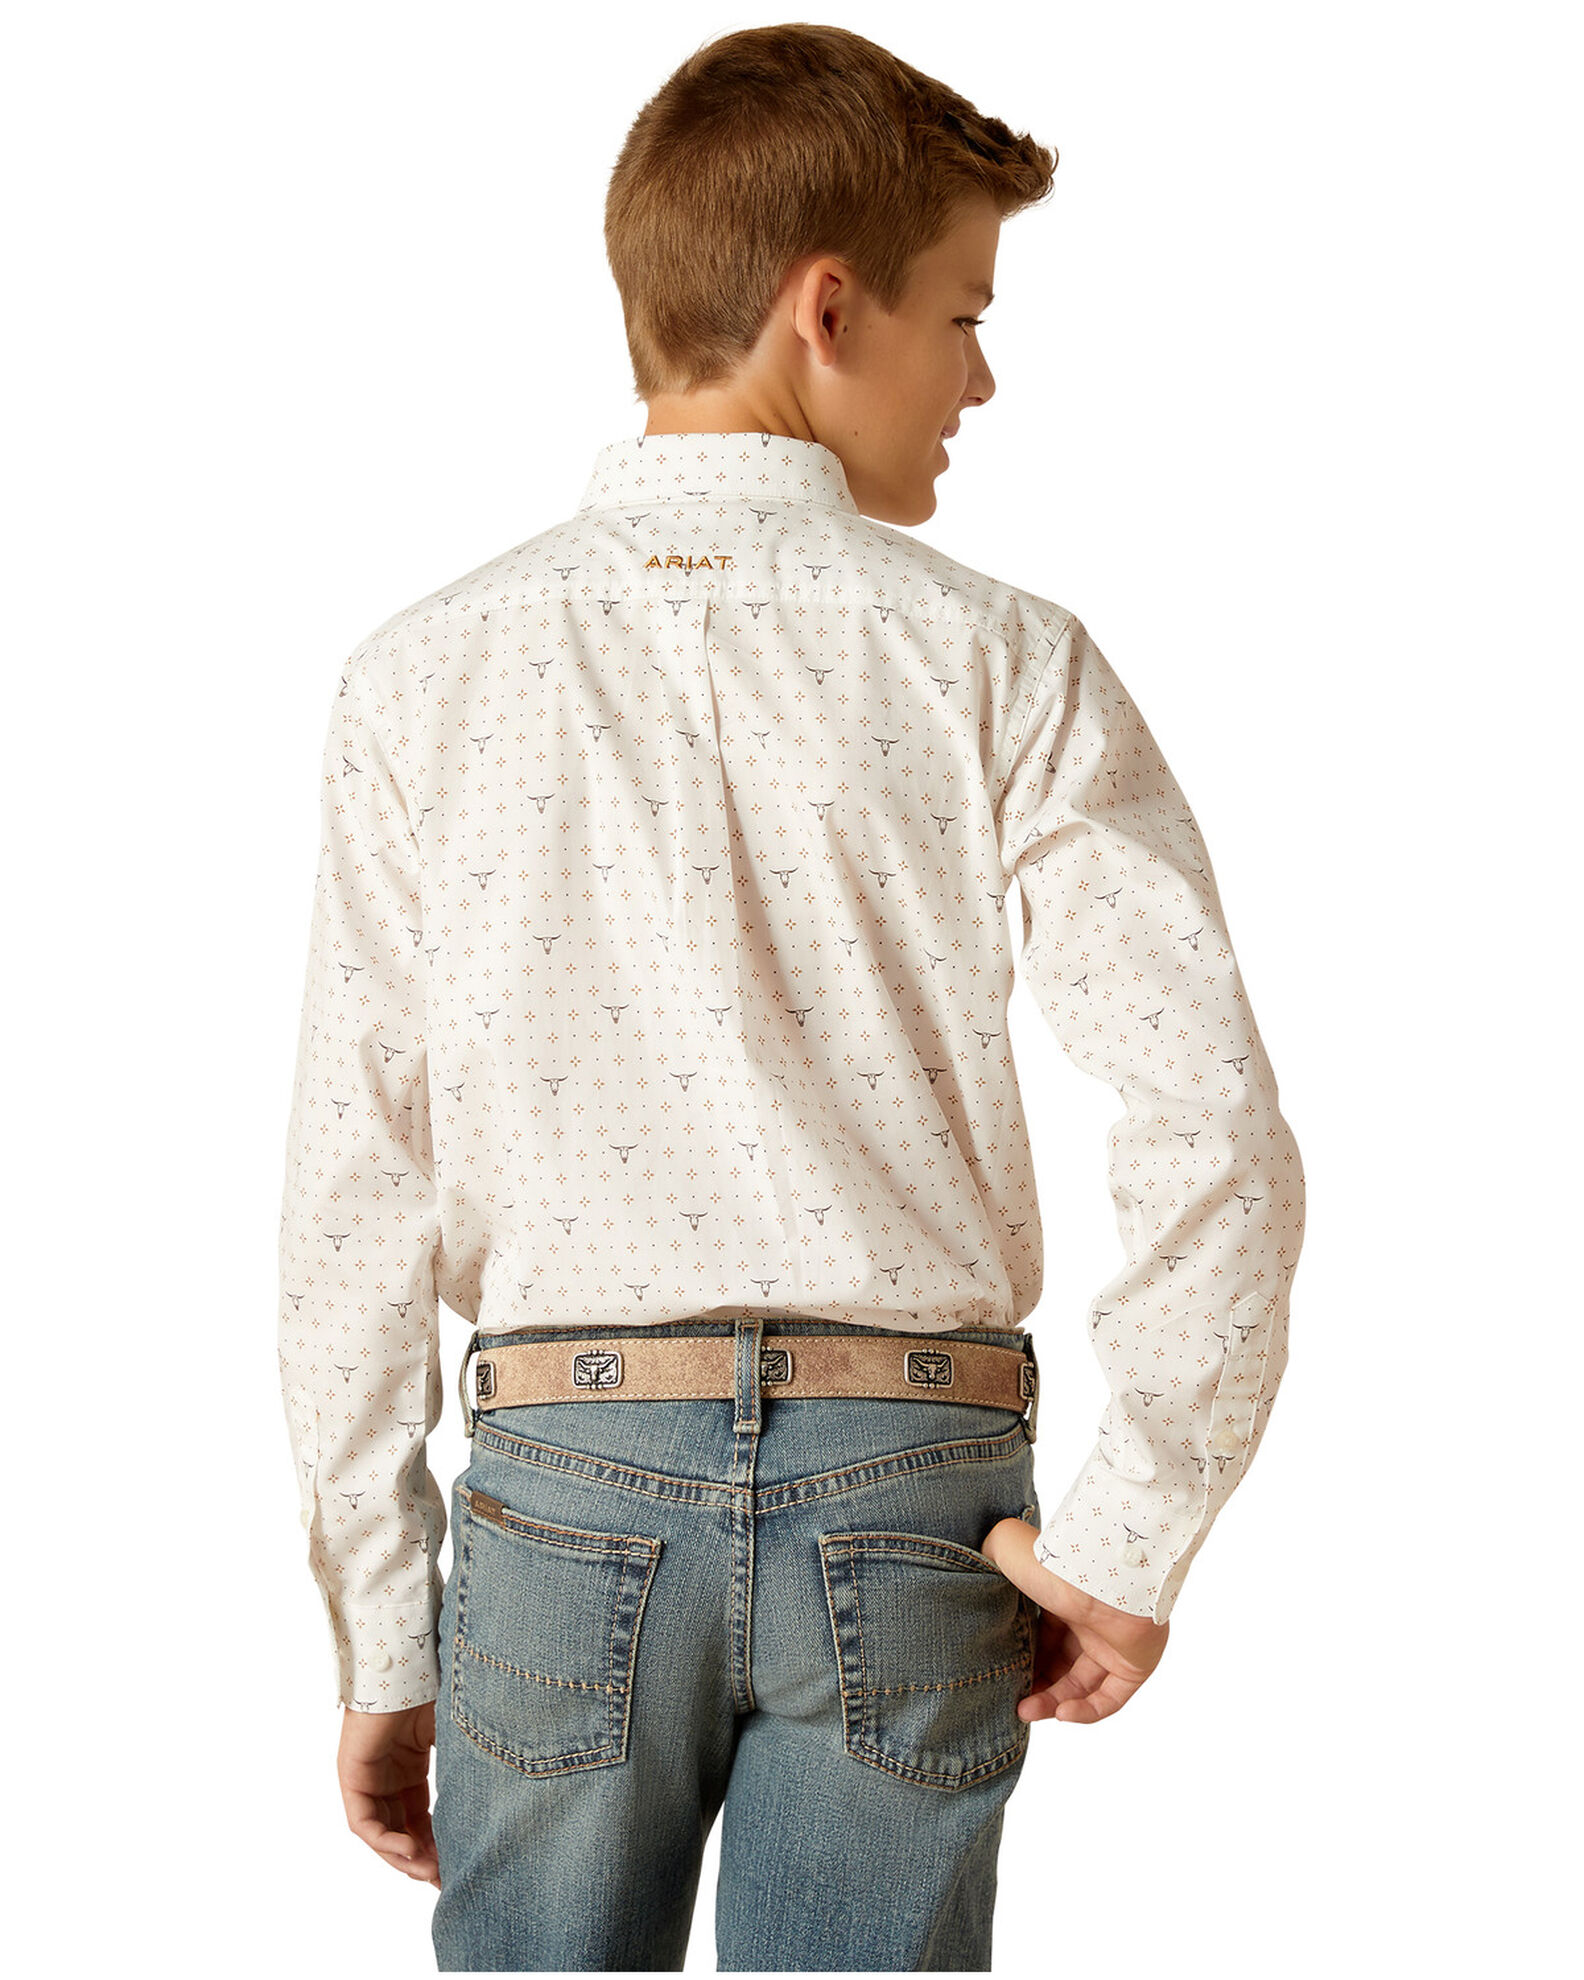 Product Name: Ariat Boys' Steer Print Long Sleeve Button-Down Western Shirt